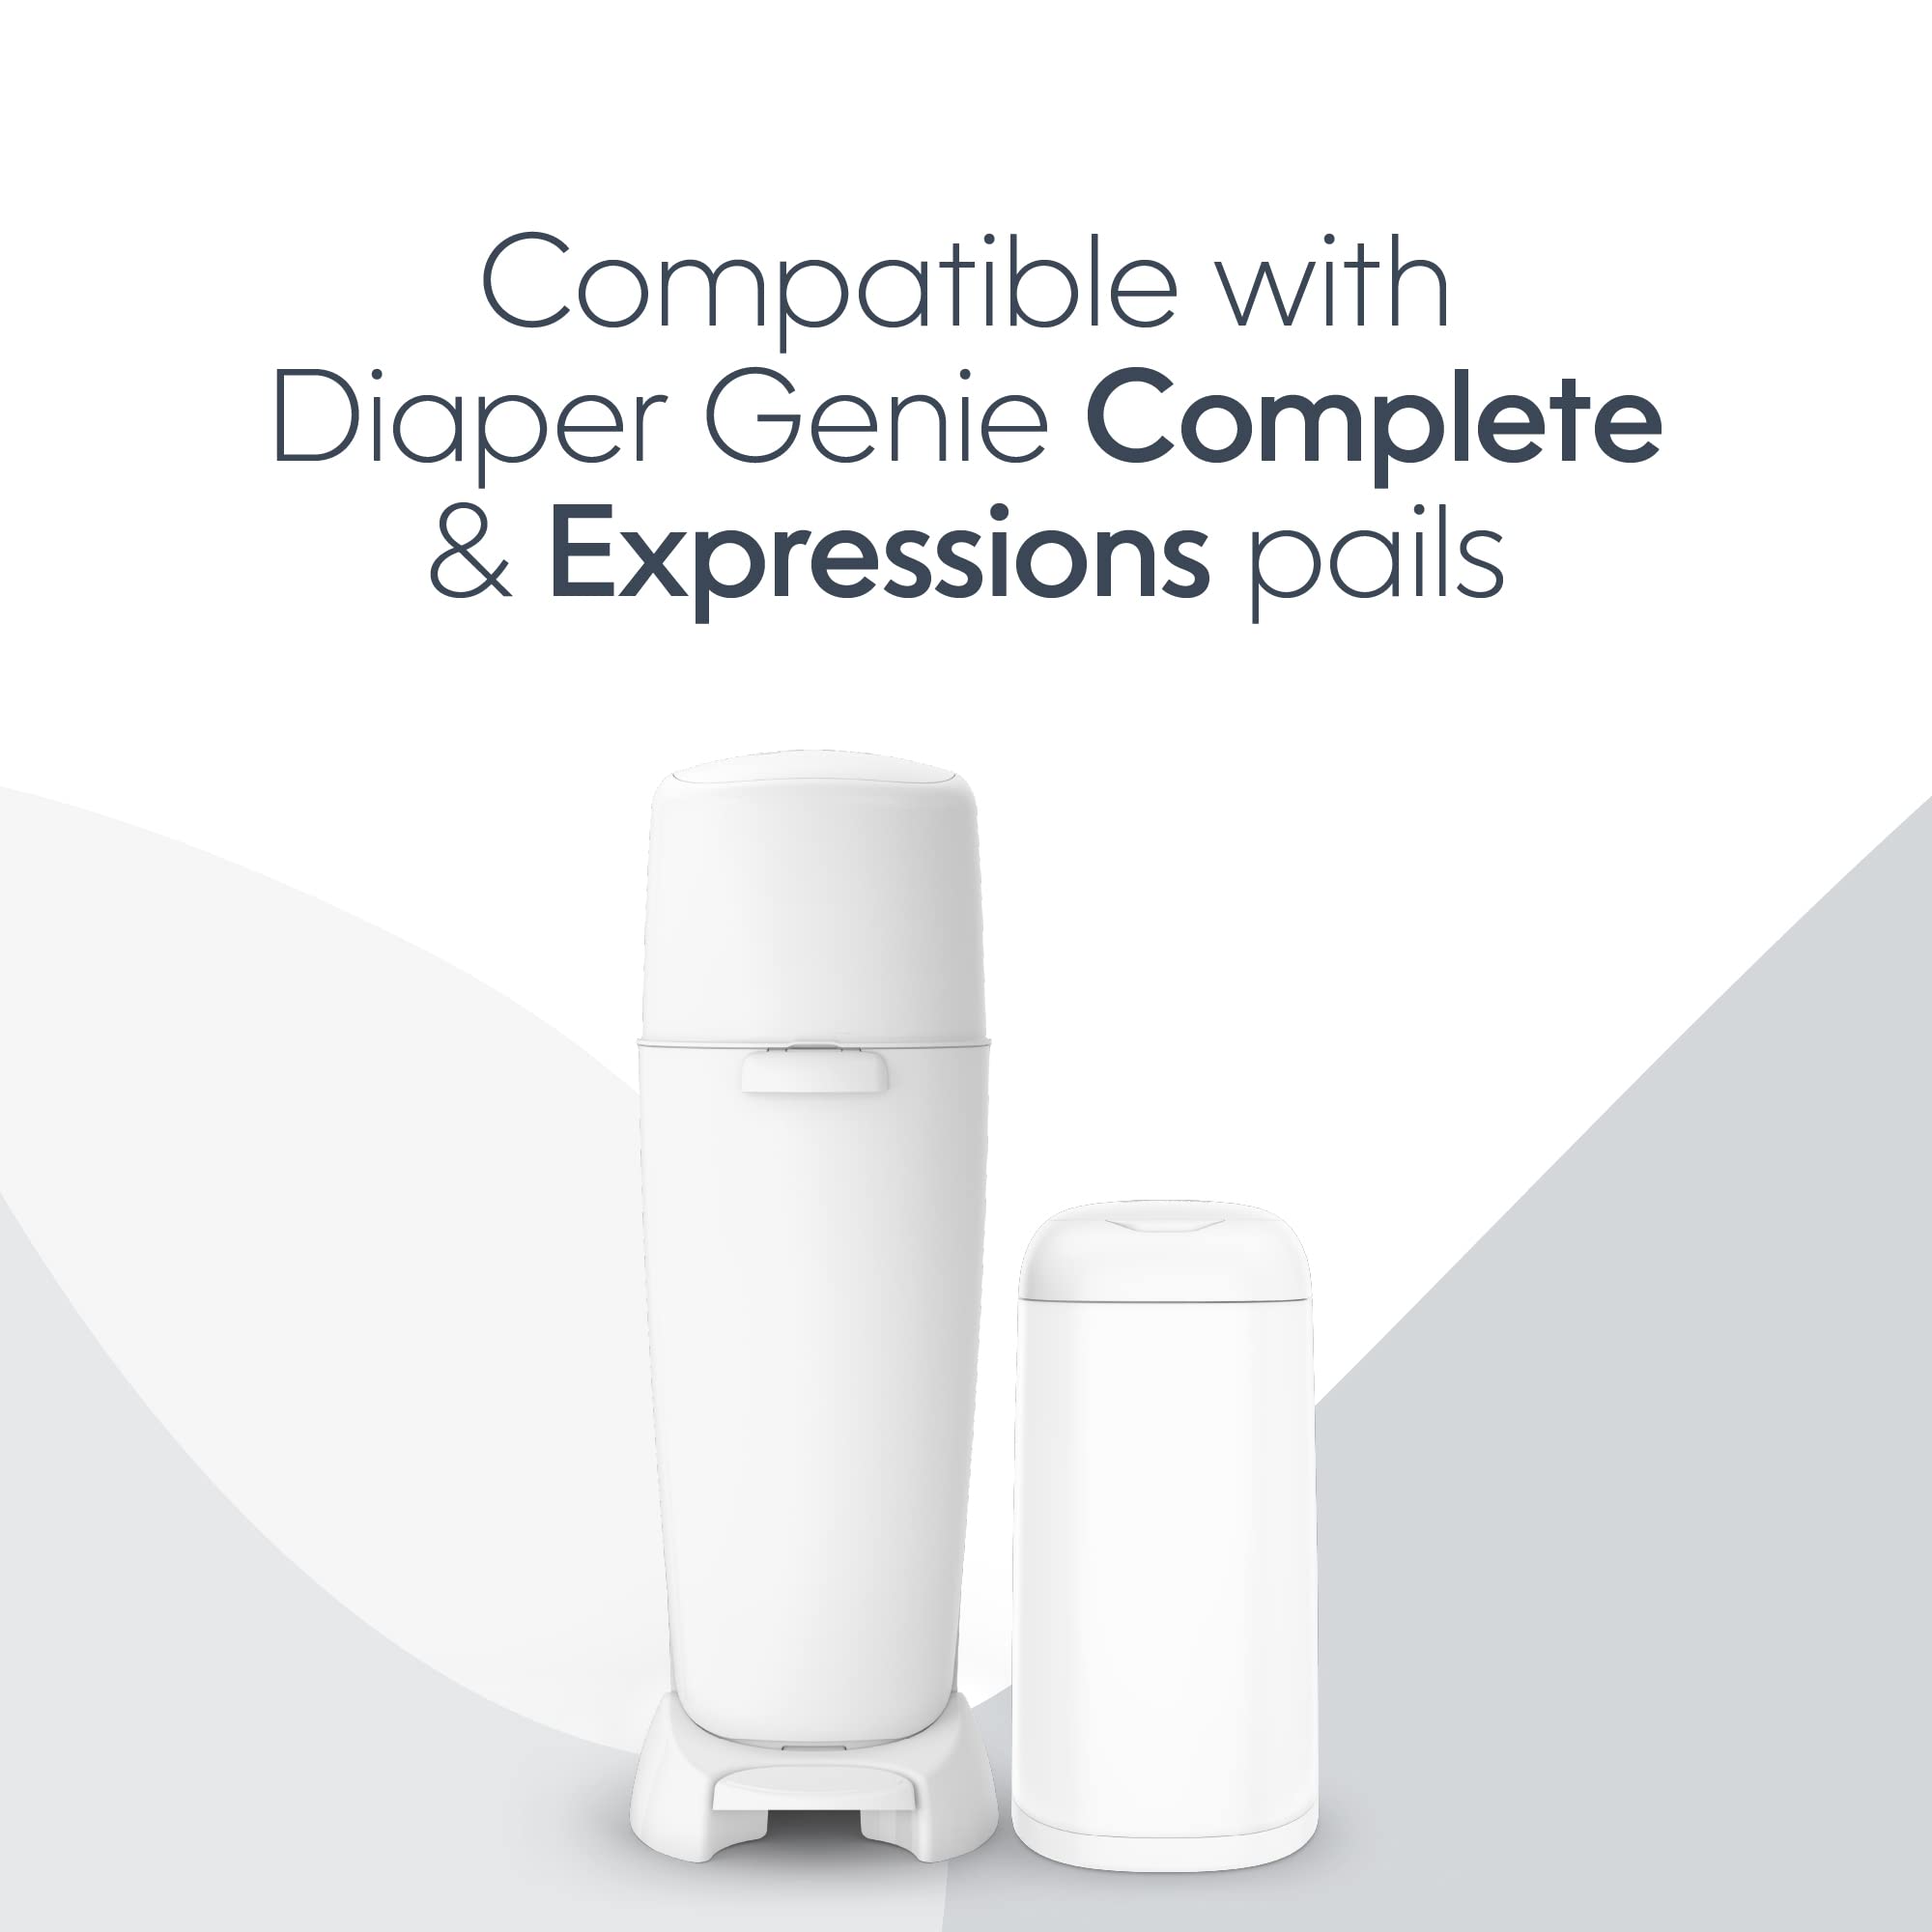 Diaper Genie Essentials Round Refill 8-Pack | Holds Up to 2560 Newborn Diapers | Features Unscented Continuous Film | Compatible with Diaper Genie Complete and Expressions Pails